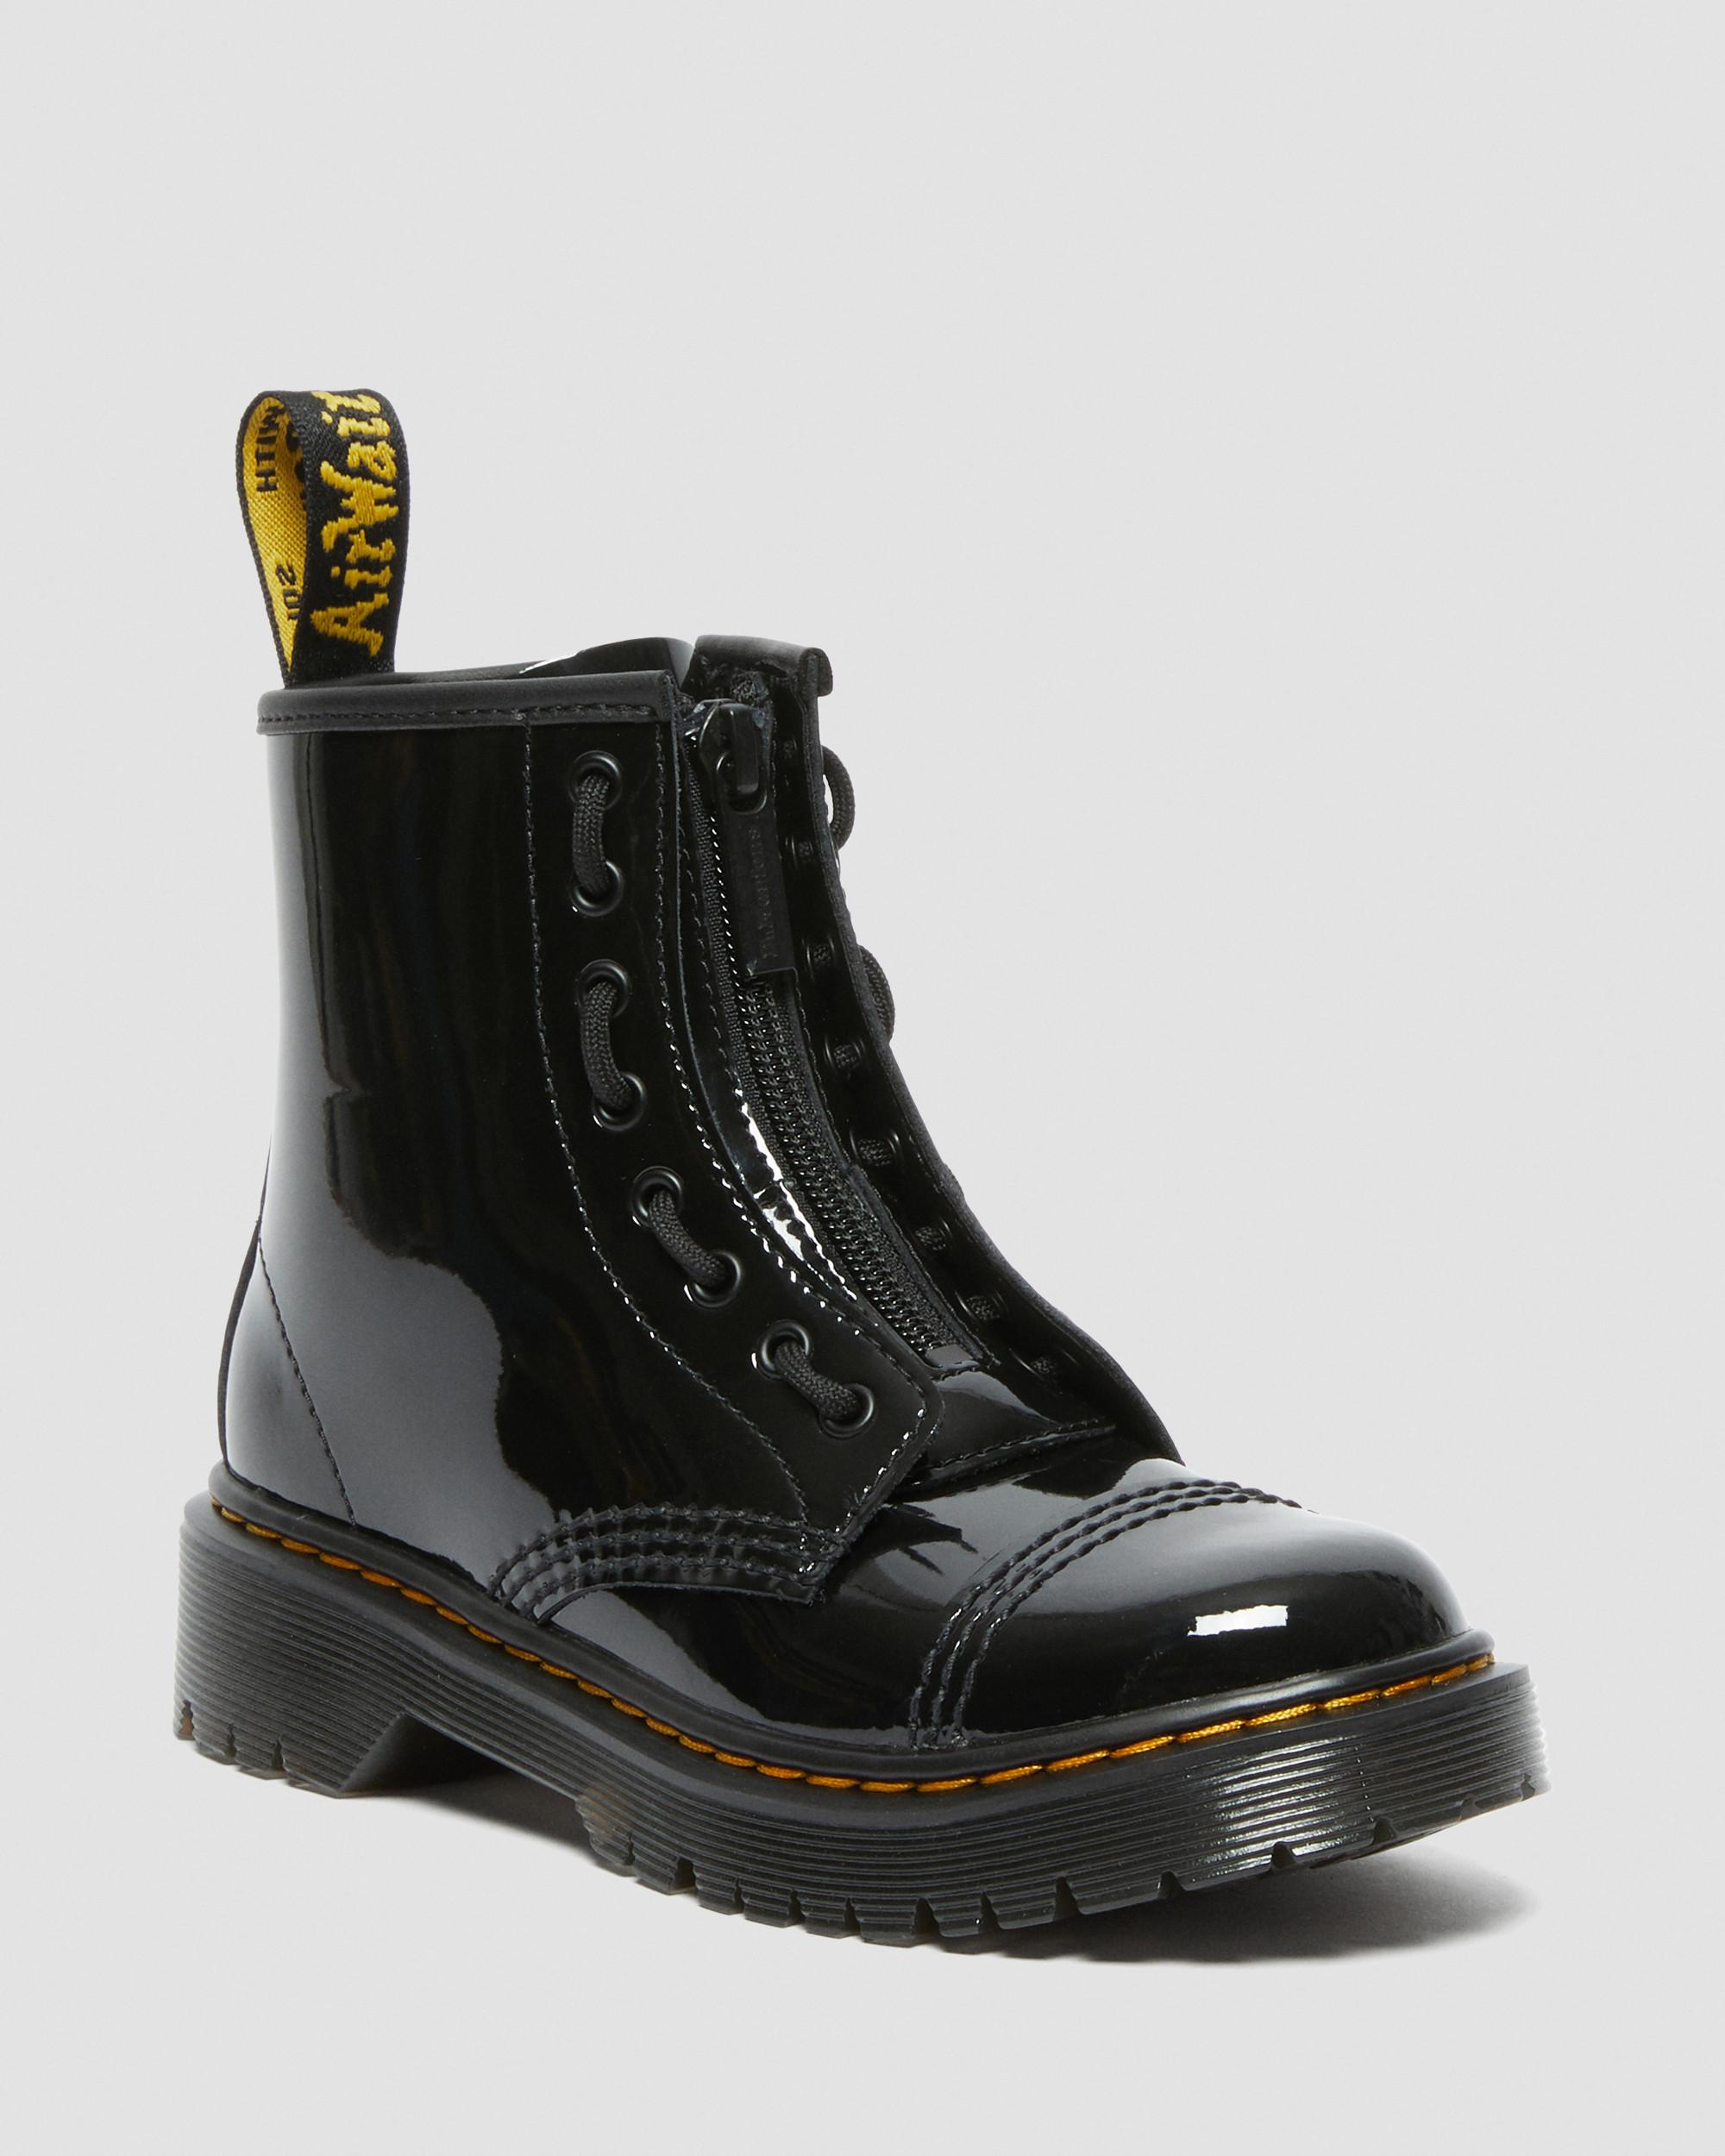 Junior Sinclair Bex Patent Leather Boots in Black | Dr. Martens